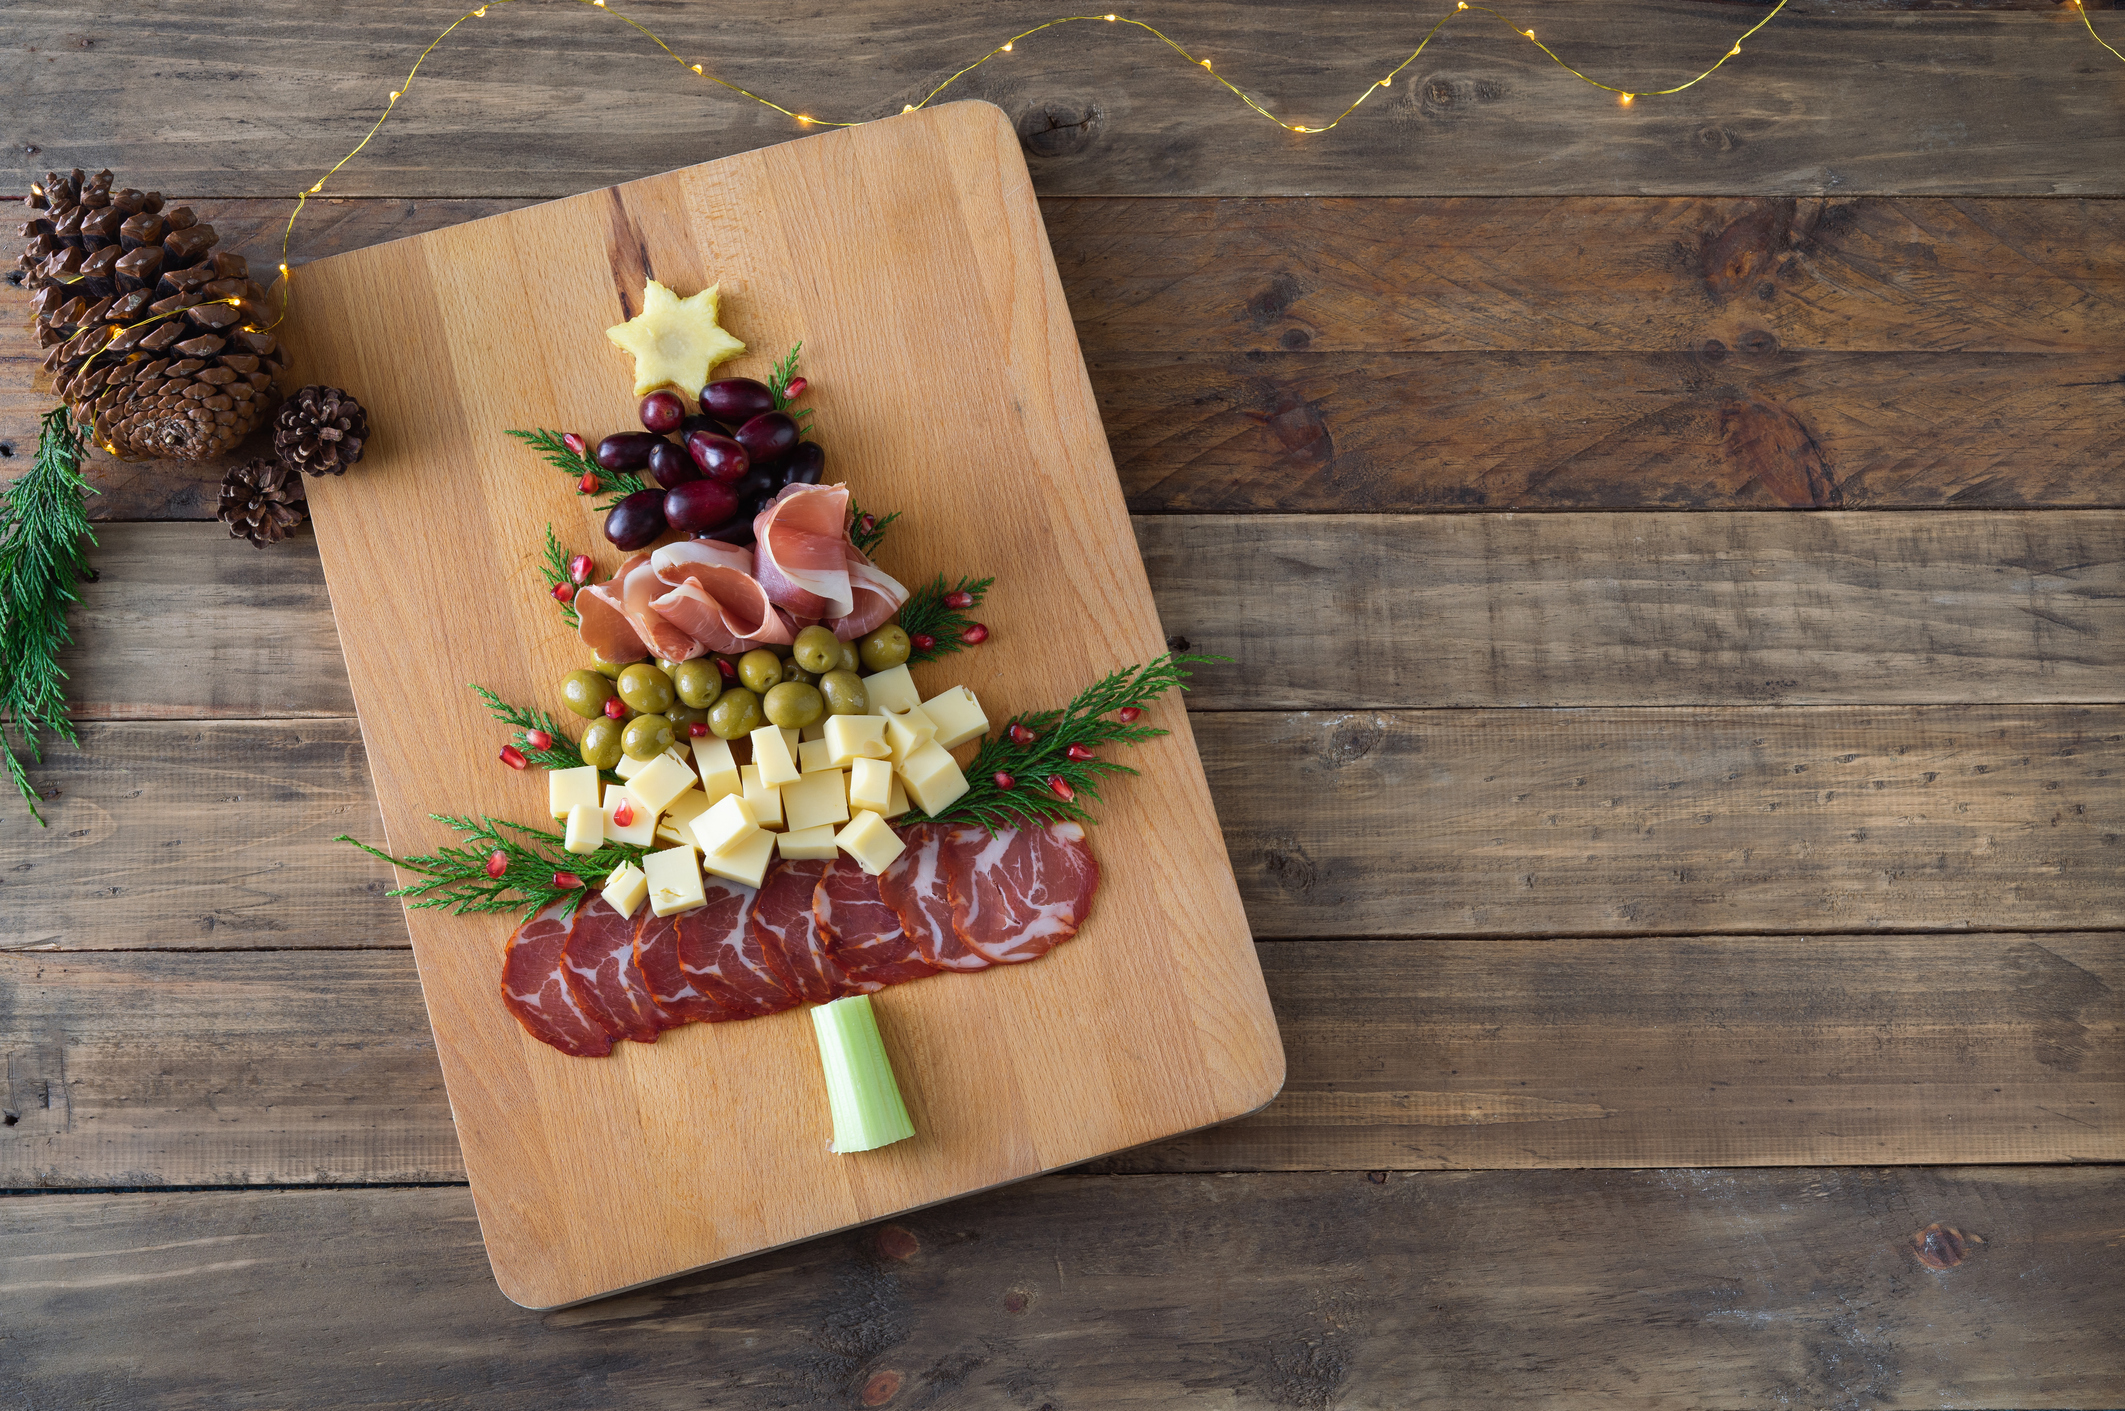 Holiday Charcuterie Boards for New Neighbors and Old Friends Alike